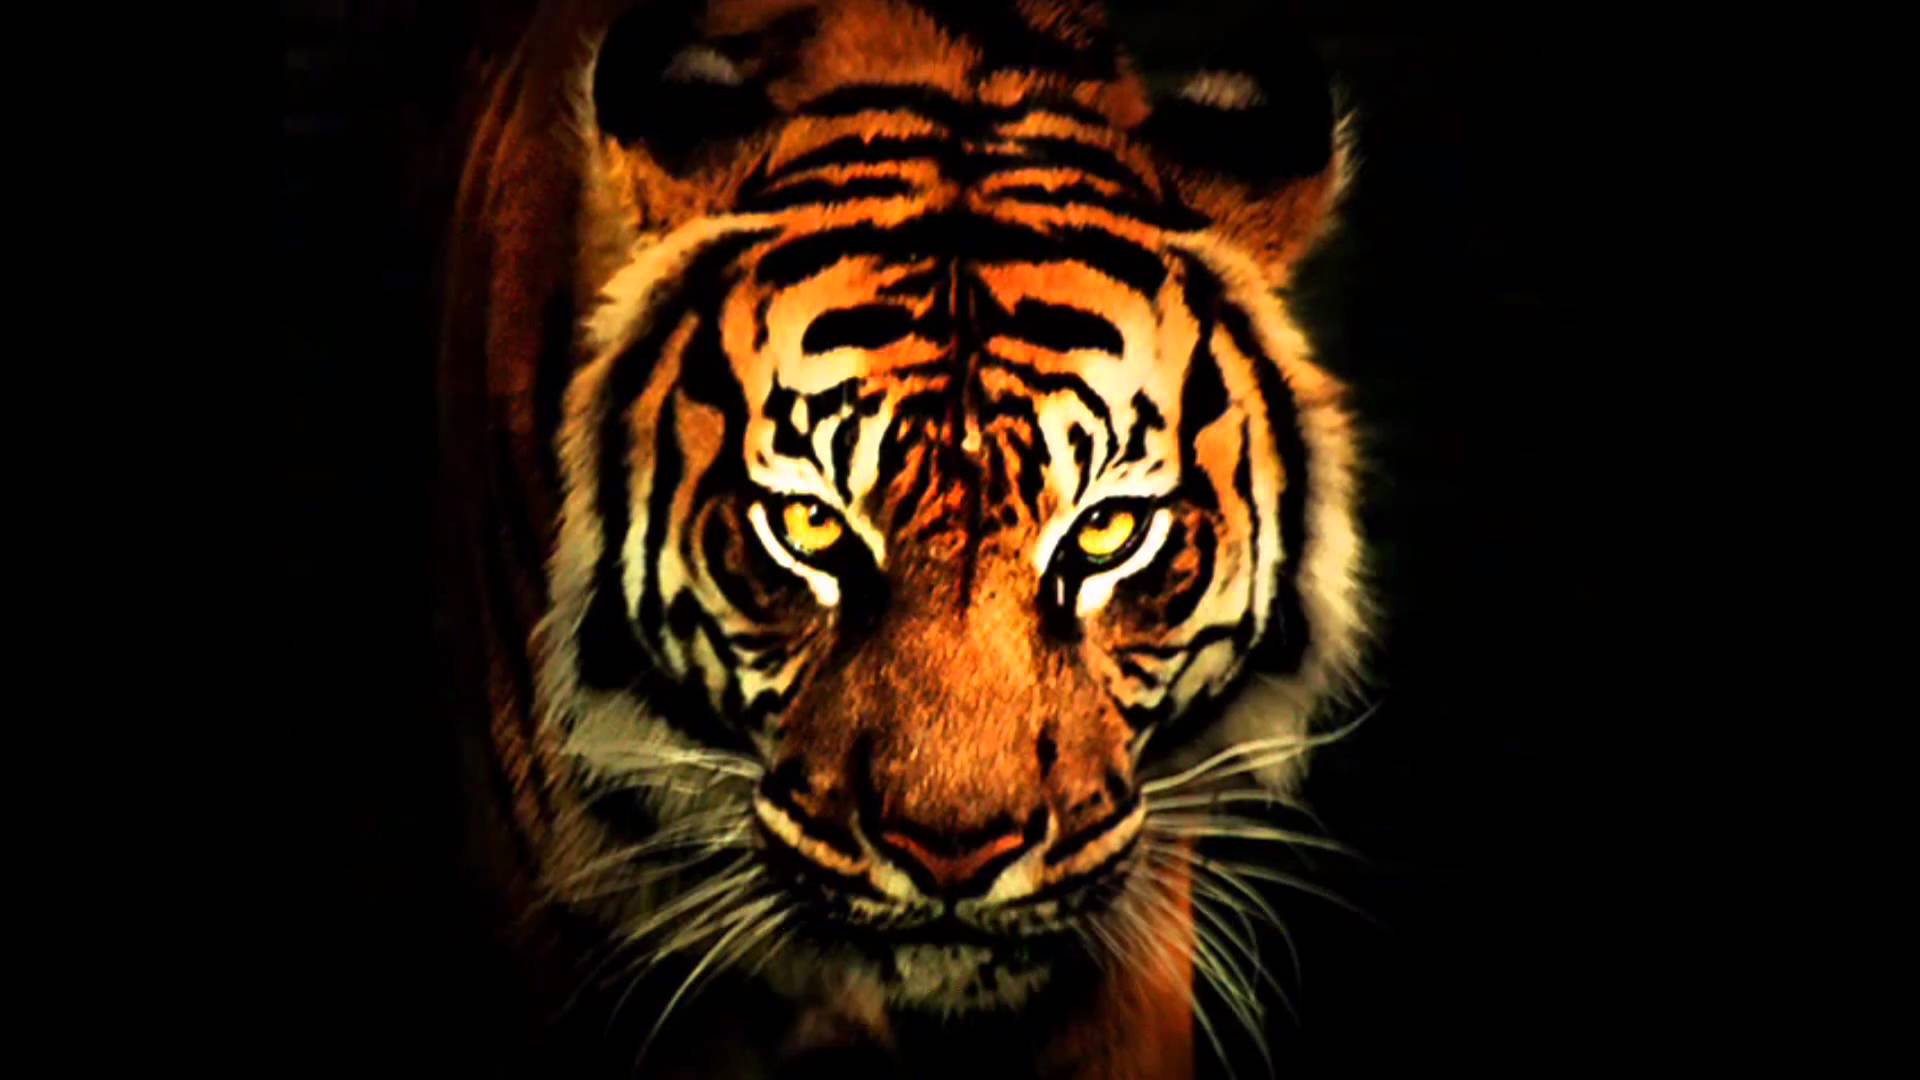 Tiger Close Up - Wallpaper, High Definition, High Quality, Widescreen